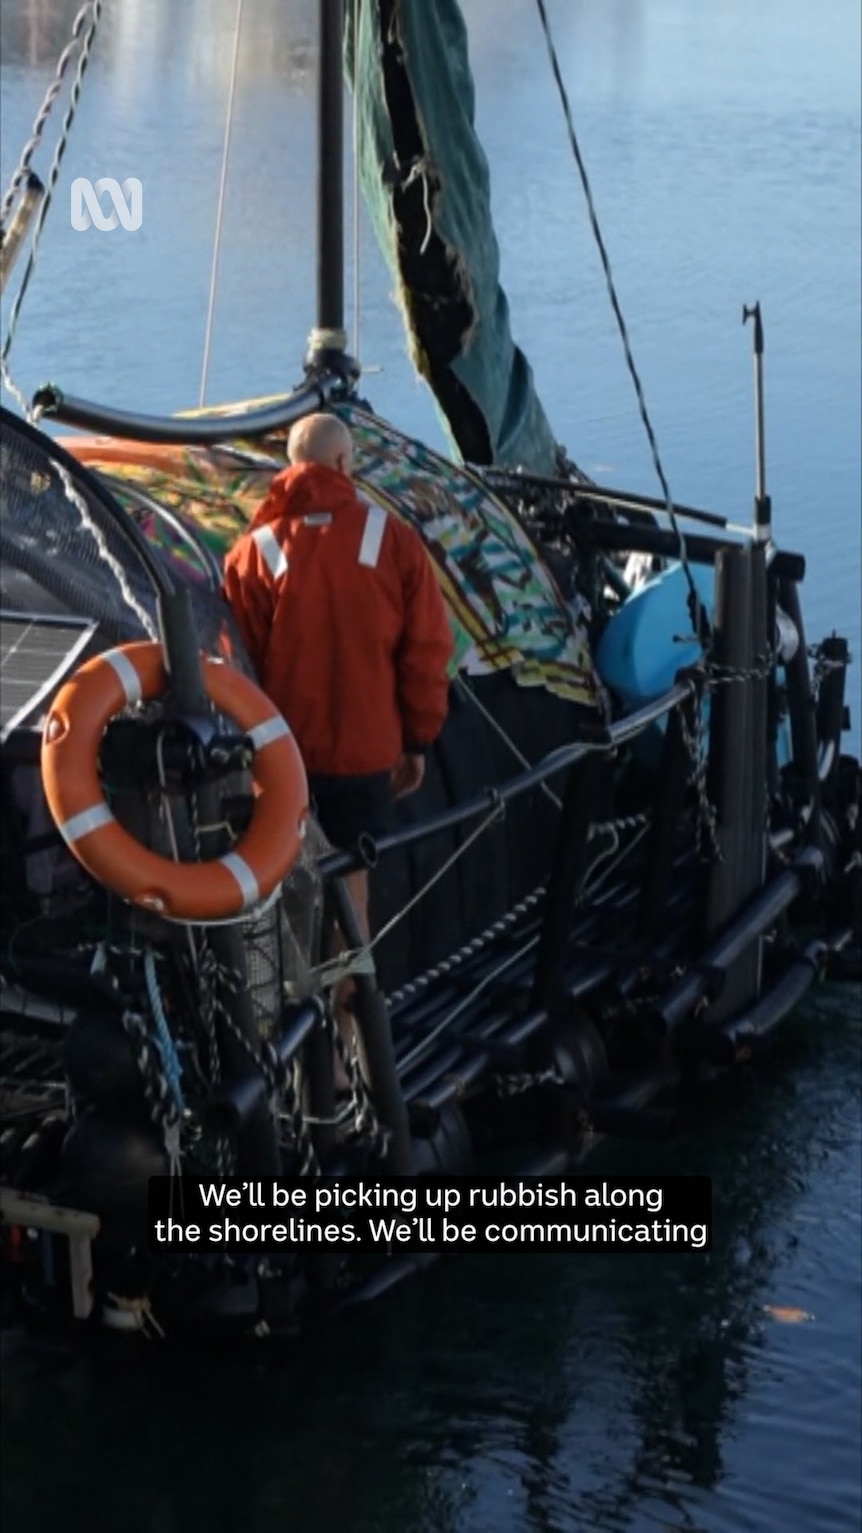 A boat on the water is shown from behind in a tight frame. A person in an orange jacket and a life ring can be seen on board.